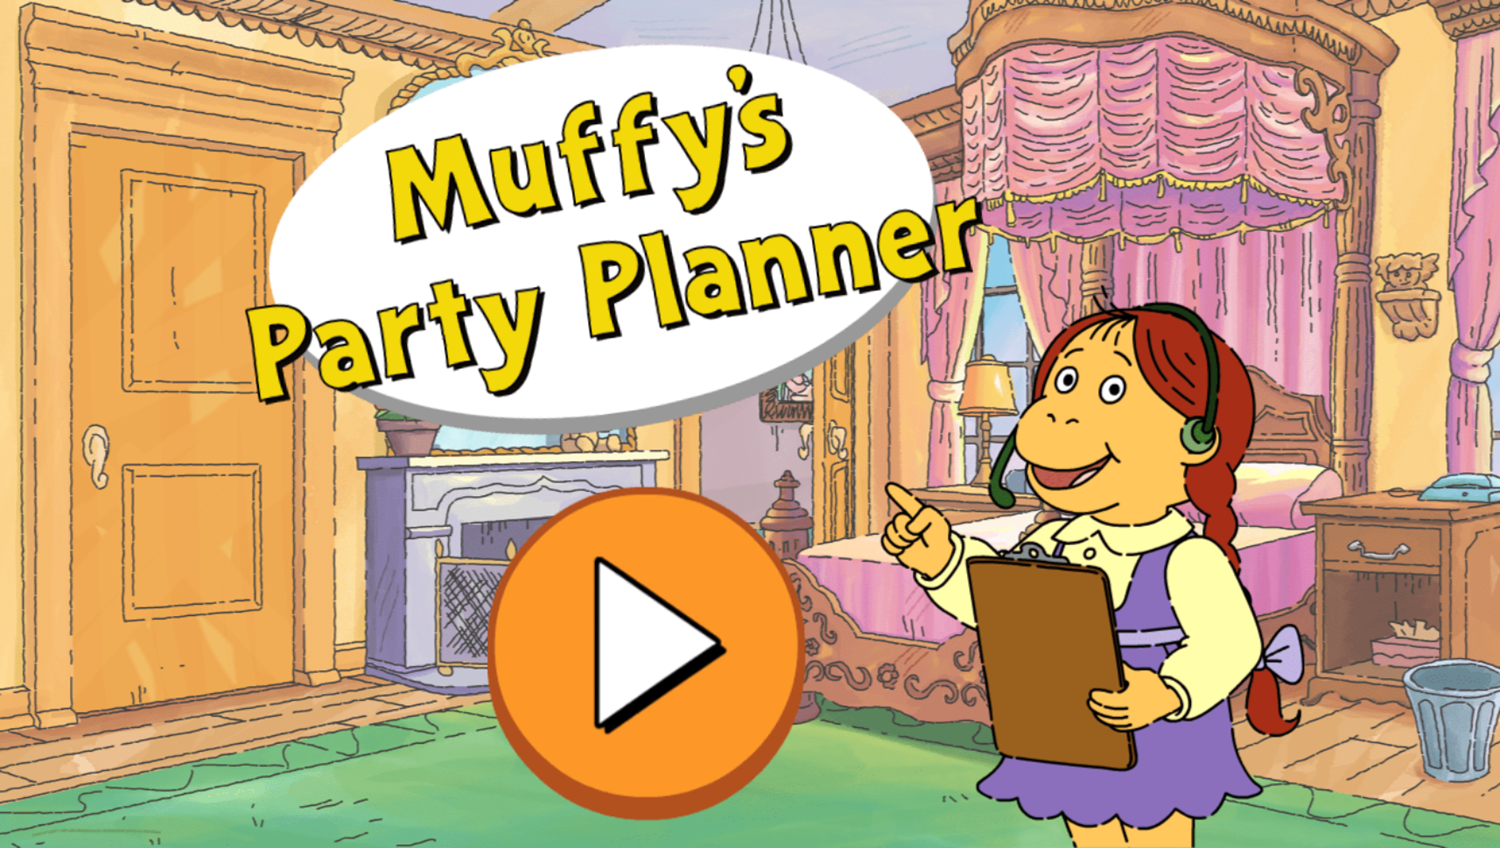 Arthur Muffy's Party Planner Game Welcome Screen Screenshot.